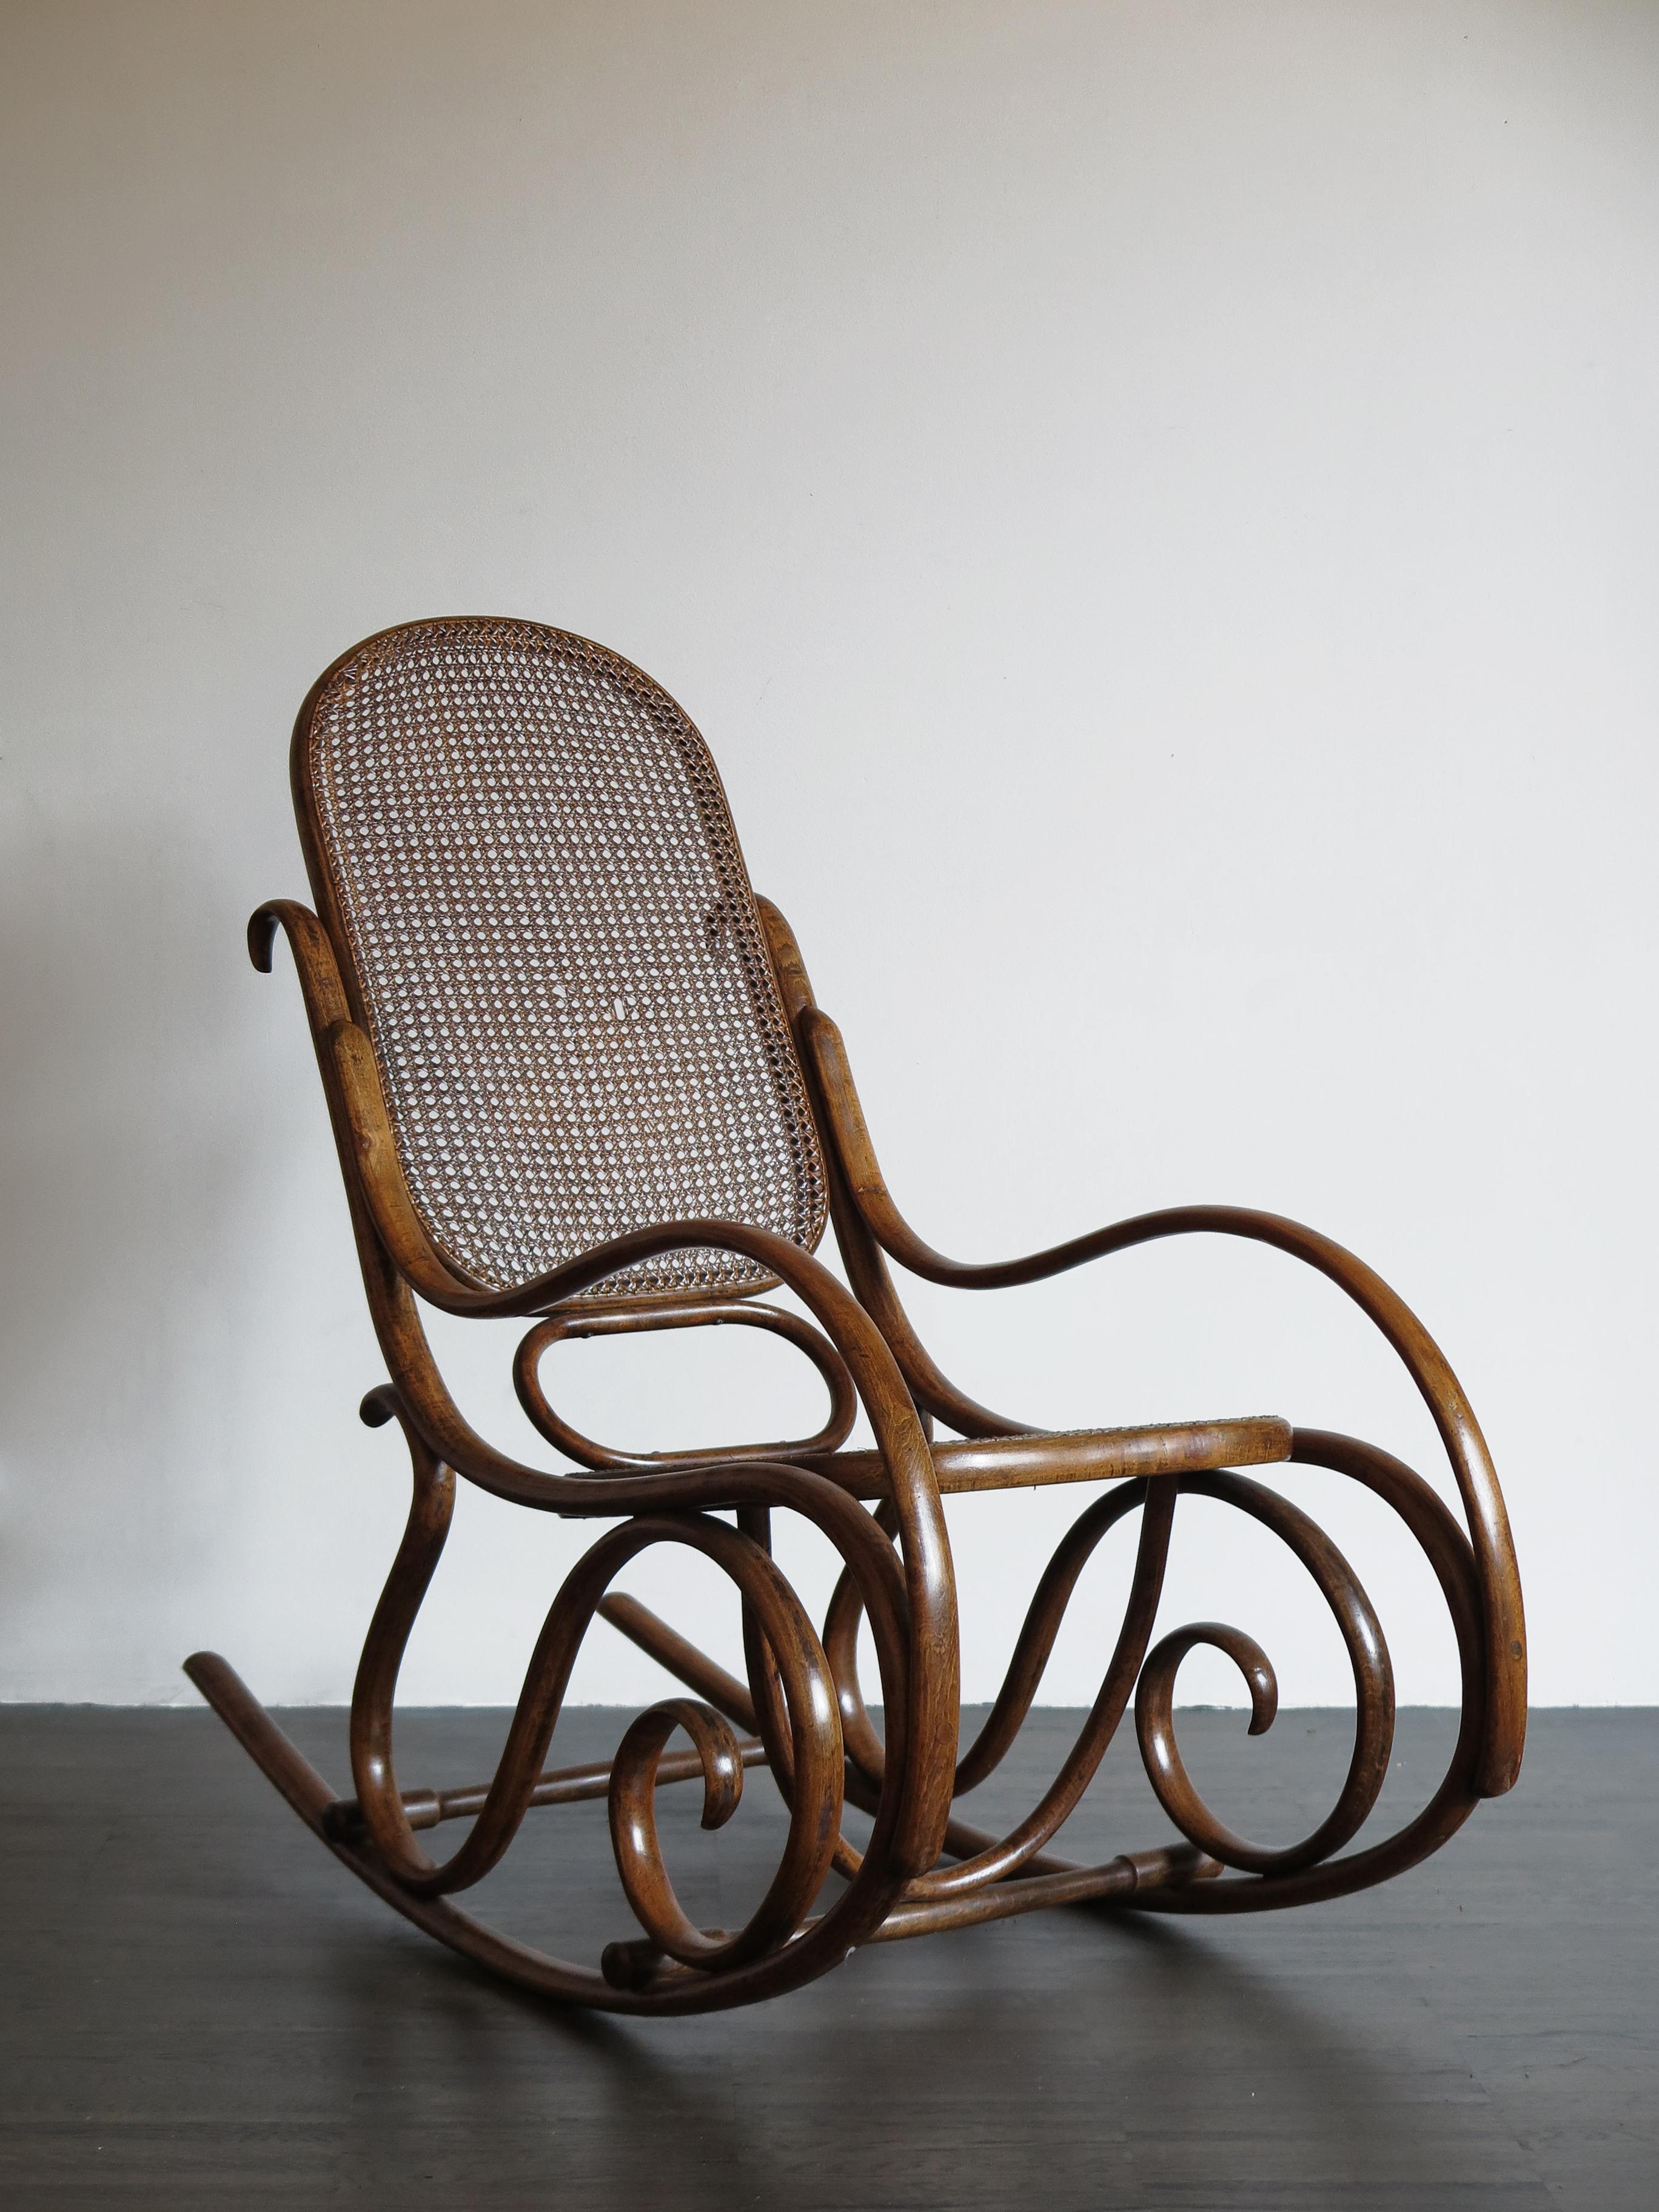 Chair rocking chair, designed by the designer and cabinetmaker Micheal Thonet with structure bentwood and back and seat in cane, 1920s.
Please note that the item is original of the period and this shows normal signs of age and use.